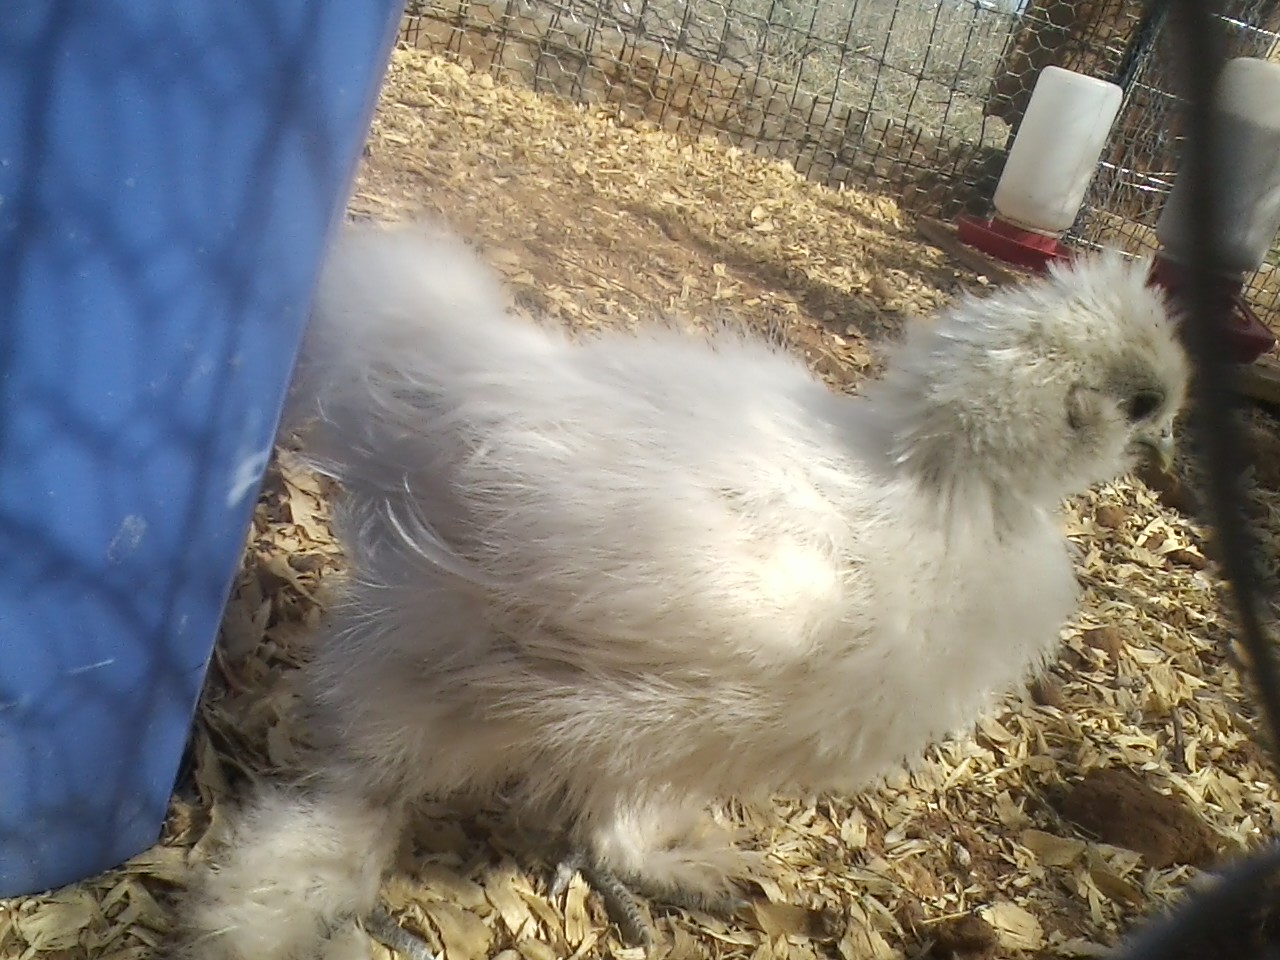 A white silkie named Mirabella, a pekin/bantam cochin named Esmerelda, and a white crested blue polish named Lorka. The speckeled sussex's were named arabella and beatrix.